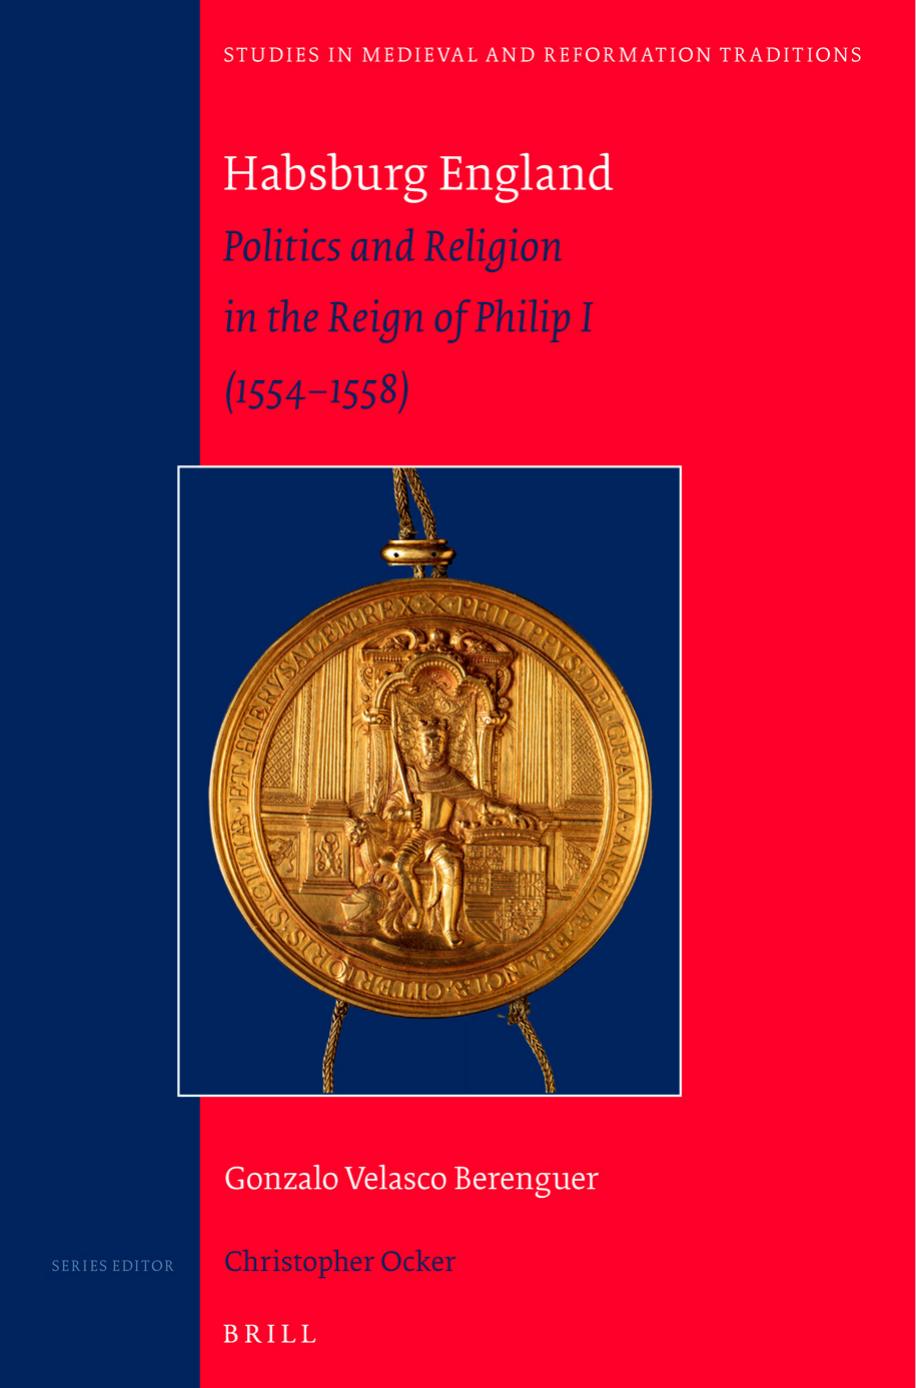 Habsburg England: Politics and Religion in the Reign of Philip I (1554-1558) by Gonzalo Velasco Berenguer